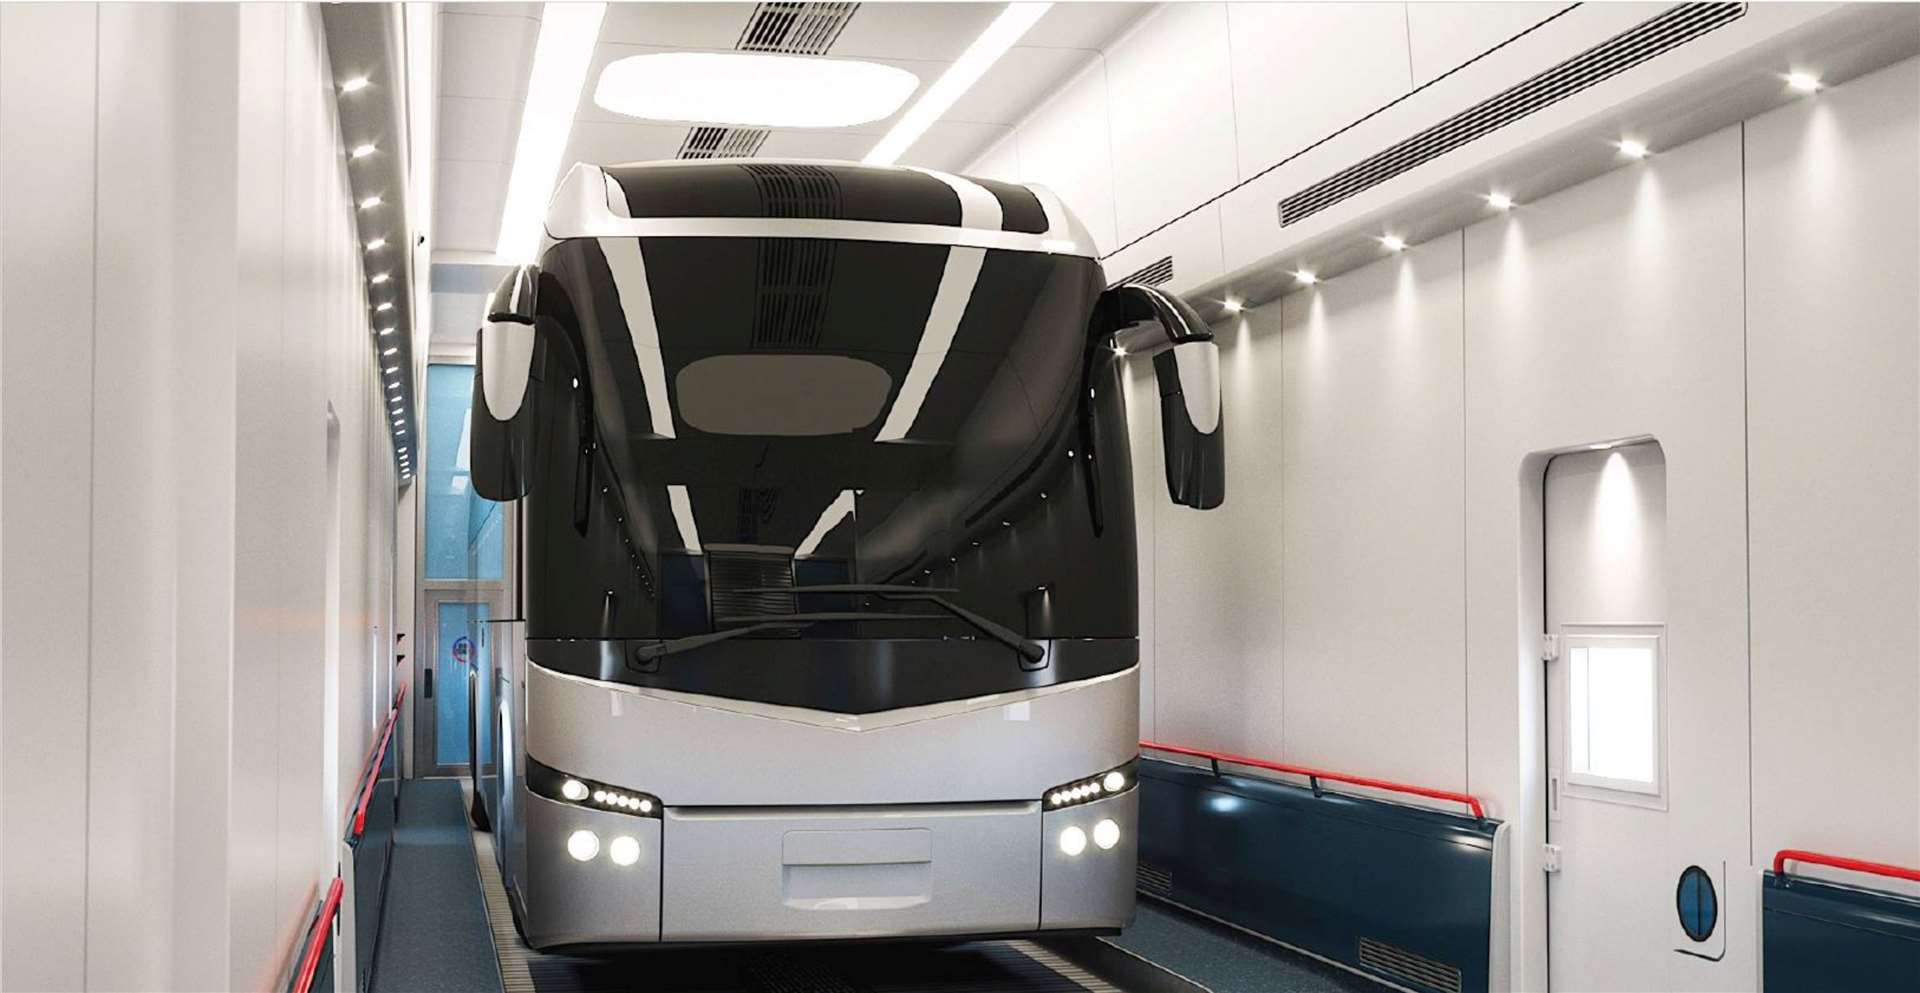 How the passenger shuttles could look once renovated. Credit: Eurotunnel (7932965)